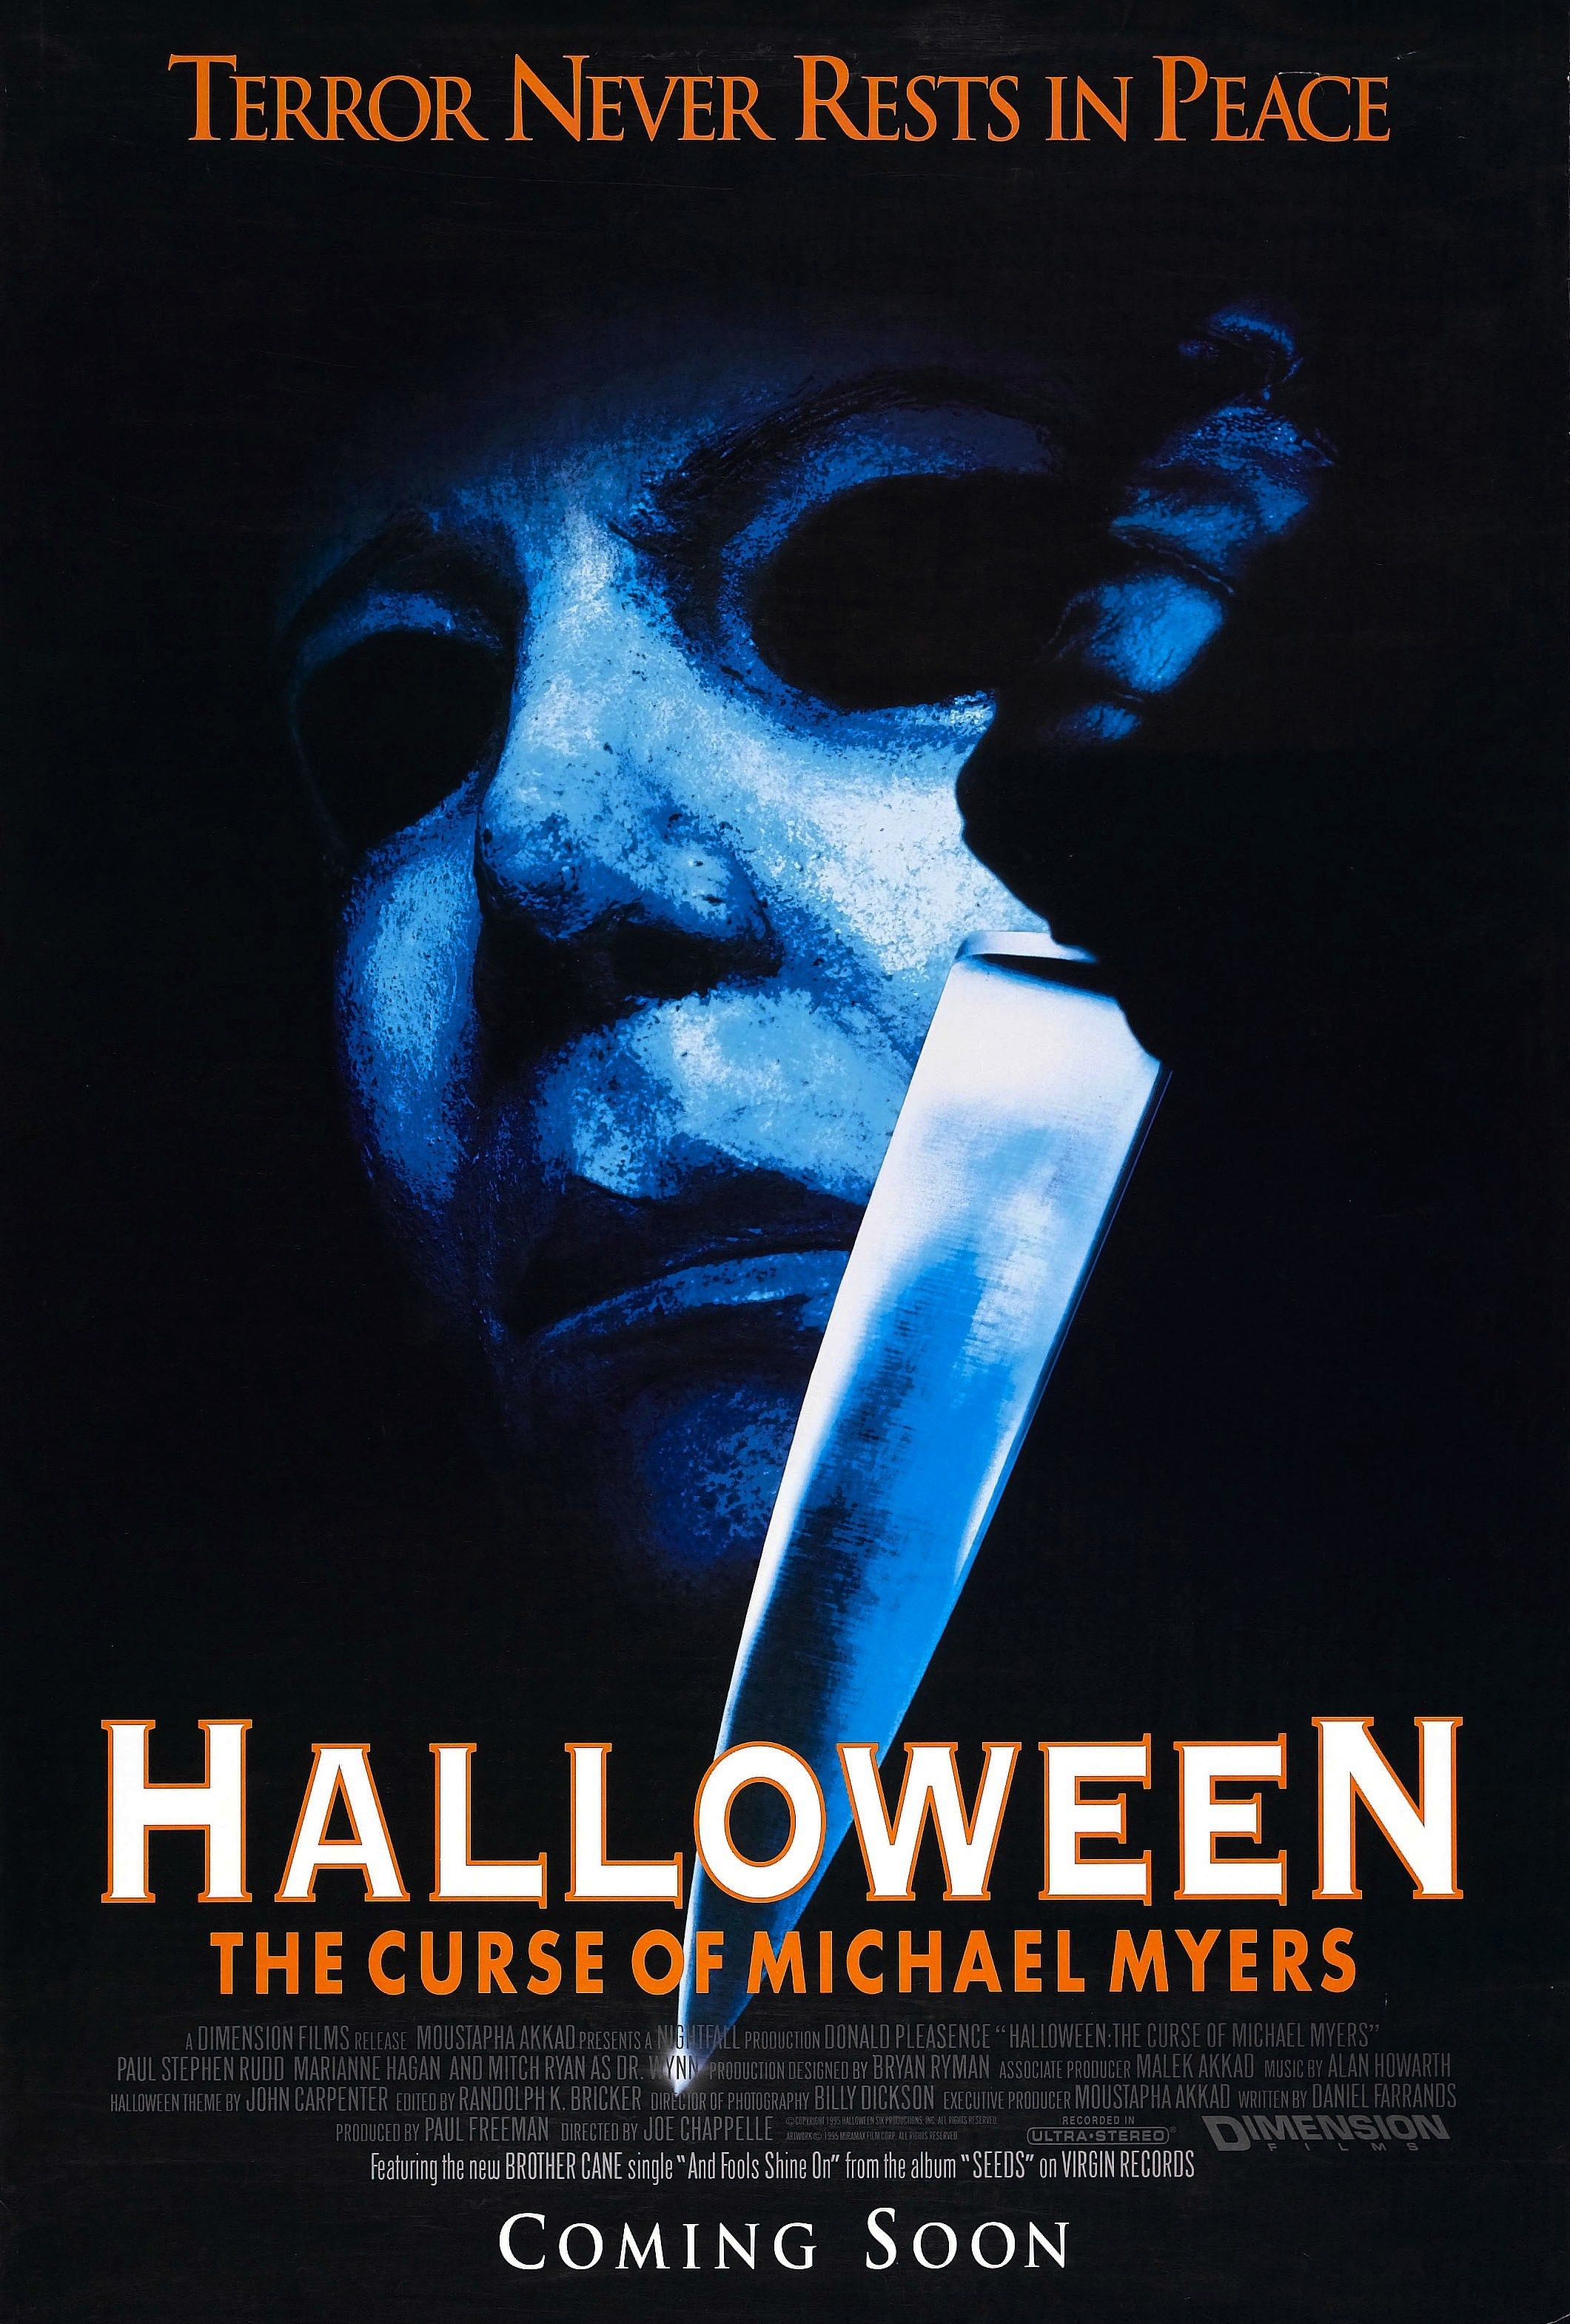 Close-up of Michael Myers holding up a knife in the poster for Halloween: The Curse of Michael Myers